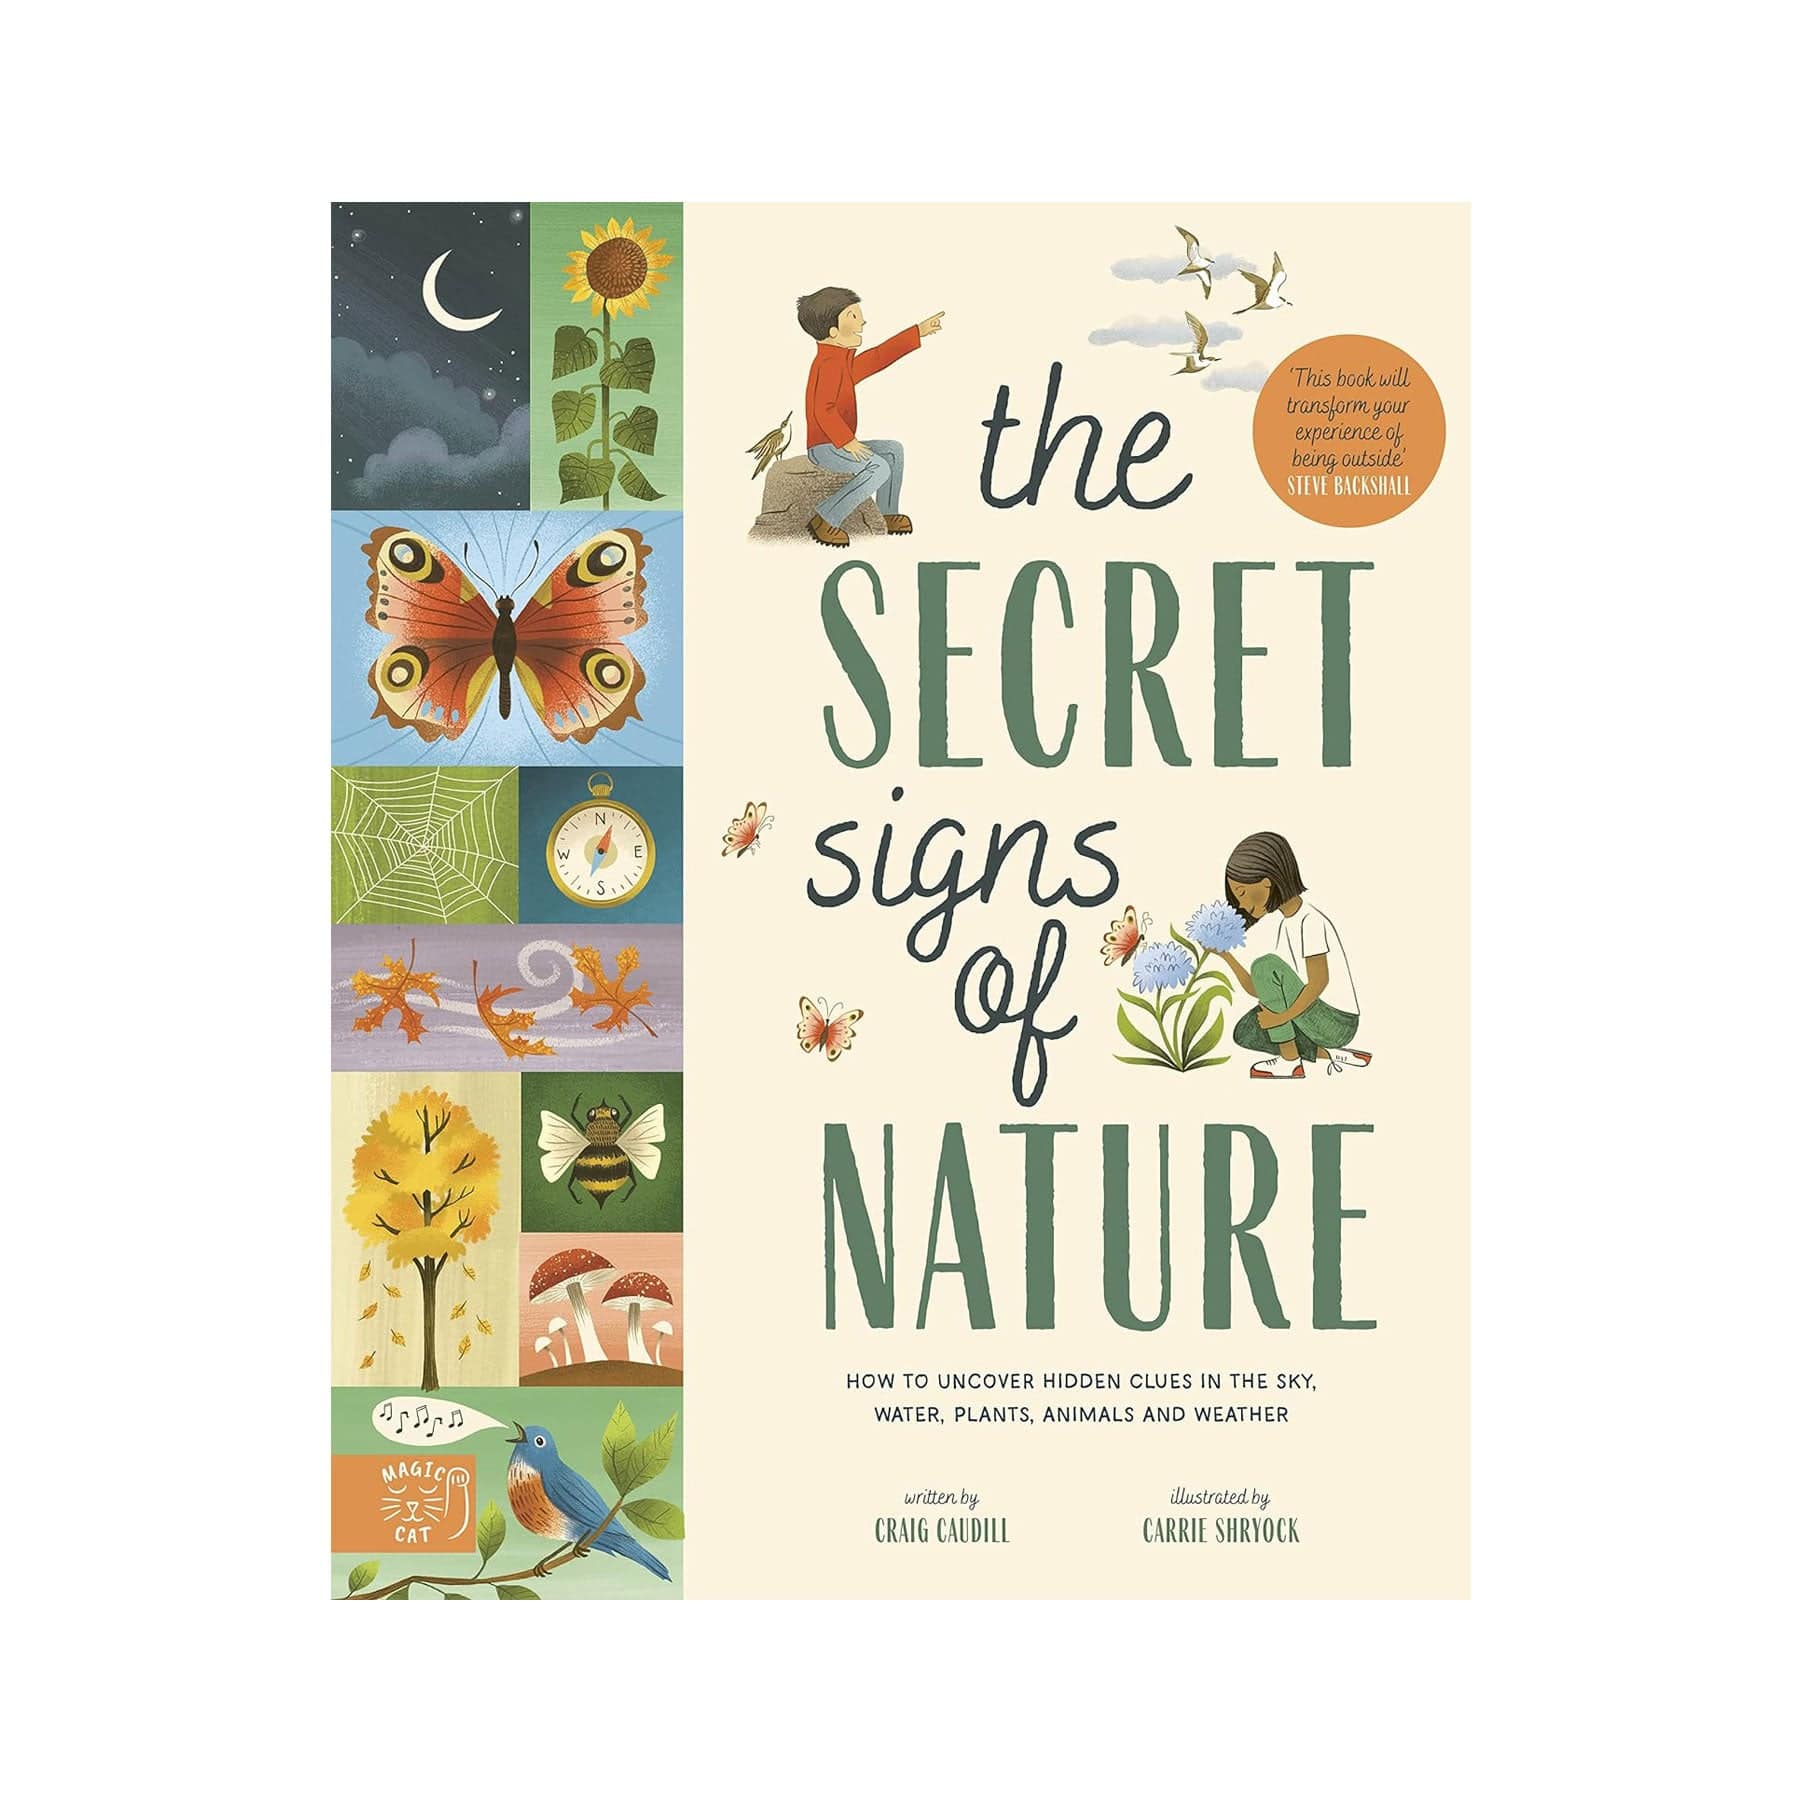 The secret signs of nature